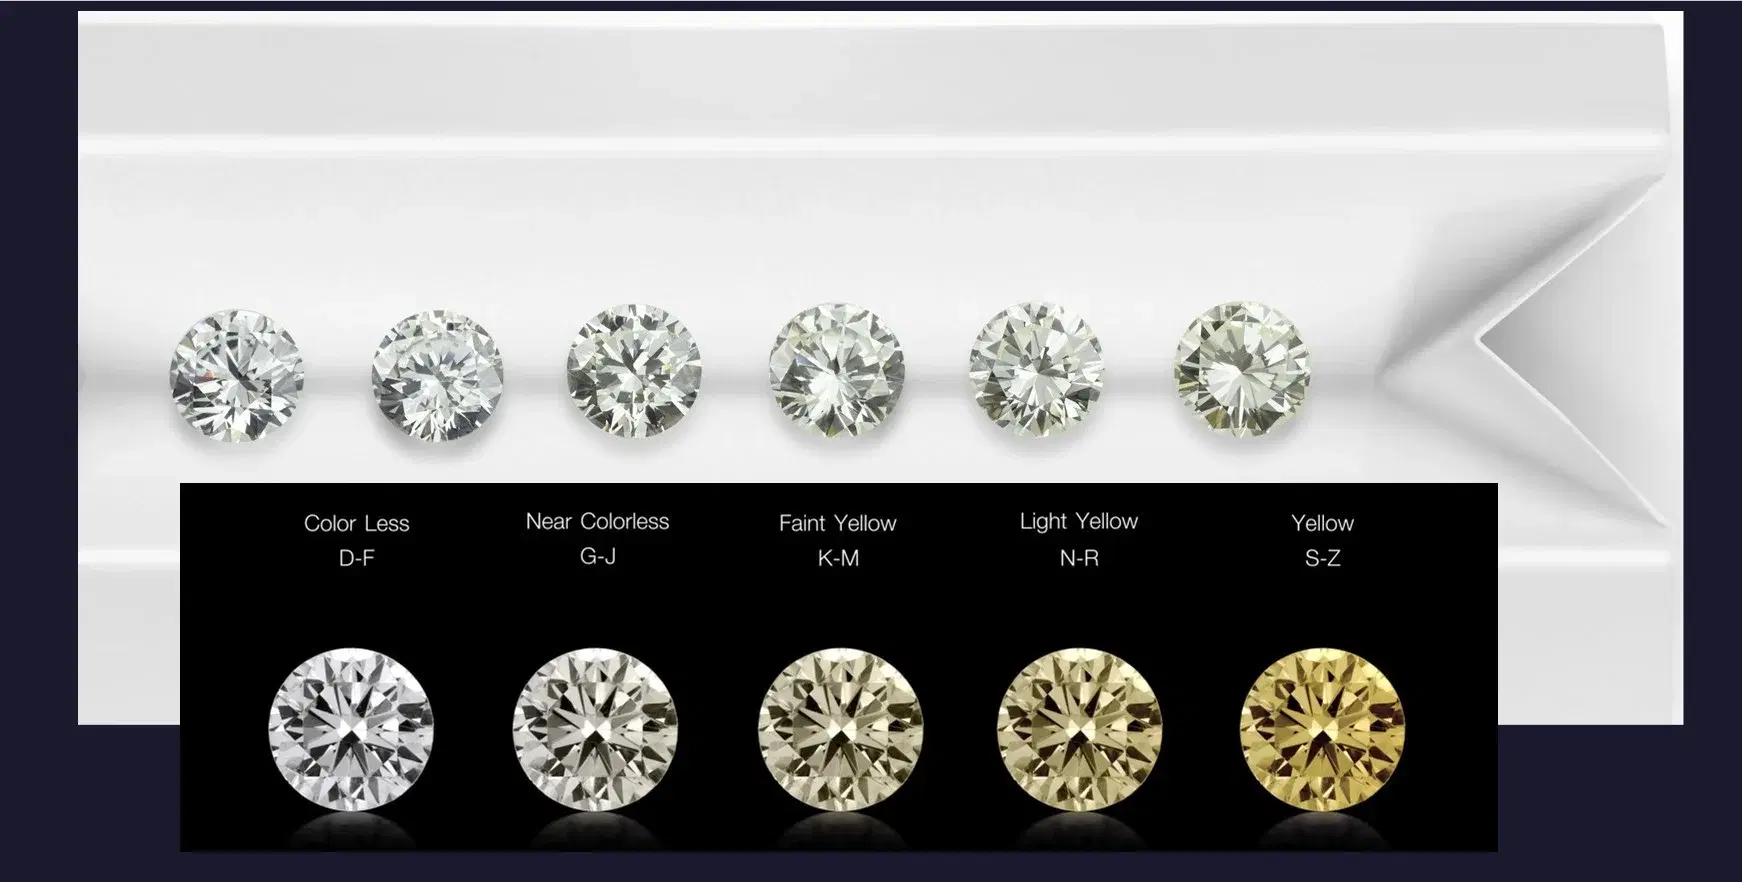 What is the Best Diamond Color?